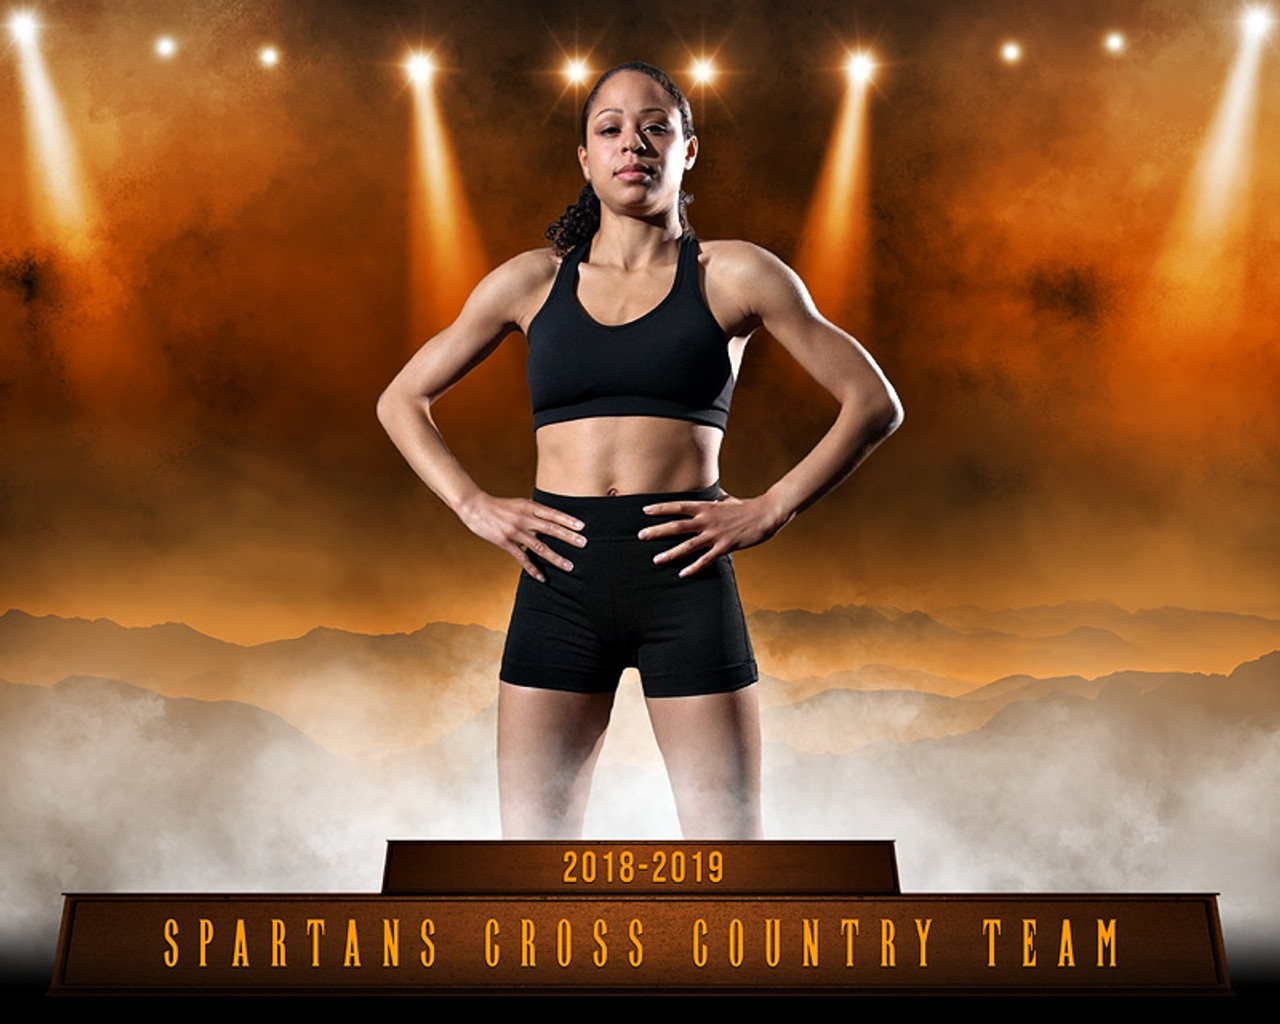 CROSS COUNTRY SPORTS POSTER PHOTO TEMPLATE - SPARTANS - CUSTOM PHOTOSHOP LAYERED SPORTS TEMPLATE